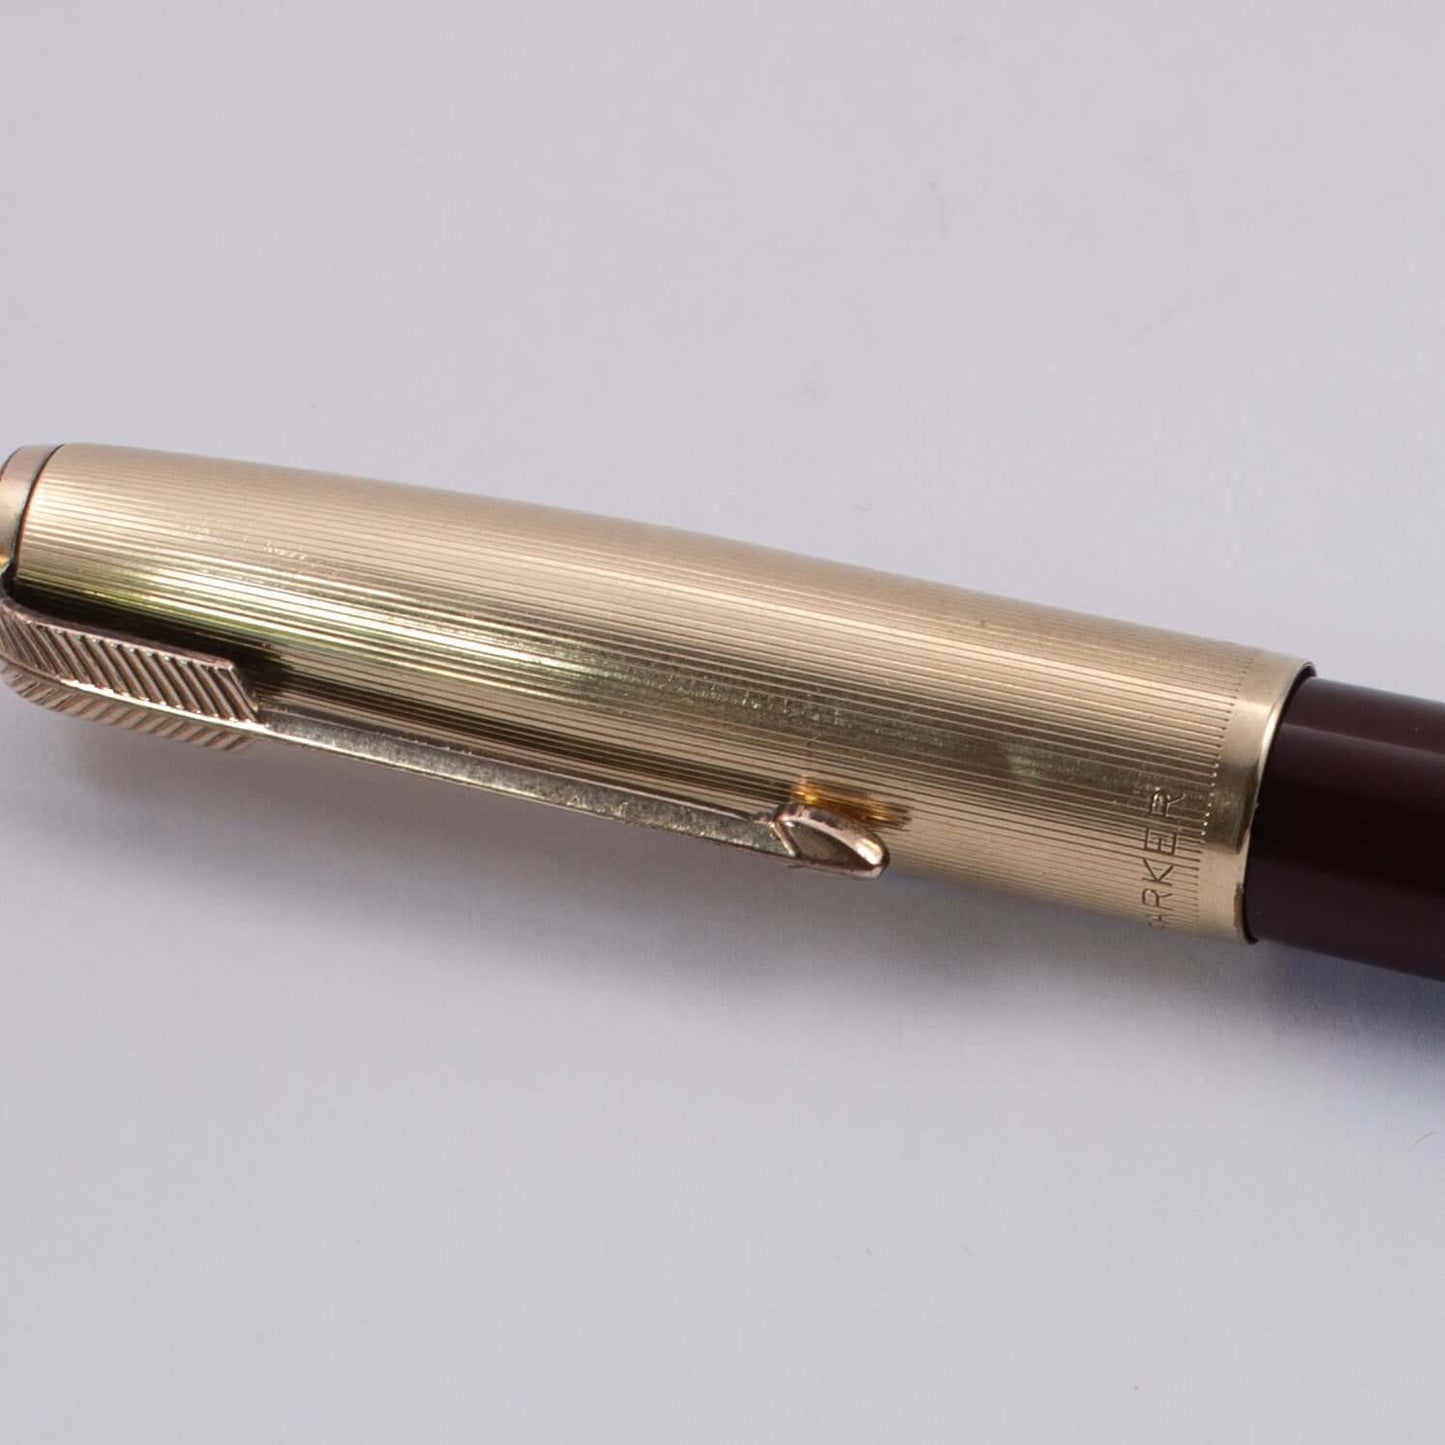 Parker 51 Demi Vacumatic, Cordovan Brown, Gold Filled Lined Cap, Fine 14K gold nib Type: Vintage Fountain Pen Product Name: Parker 51 Vacumatic Manufacture Year: 1947 Length: 4 7/8 Filling System: Vacumatic, restored with new diaphragm Color/Pattern: Cord